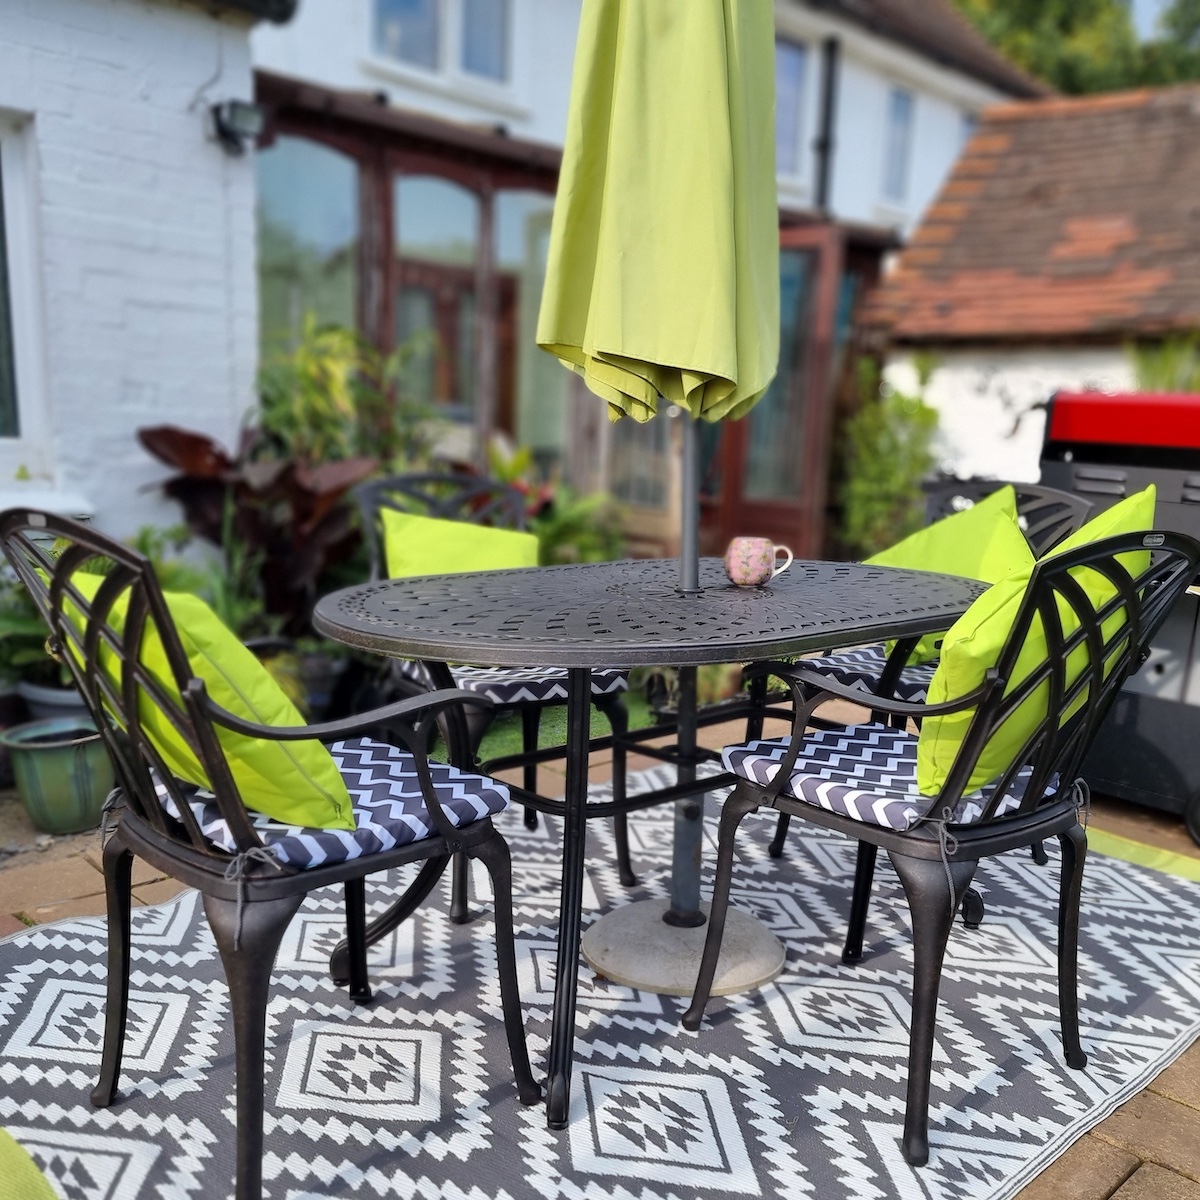 Define your patio seating or dining area with an outdoor rug